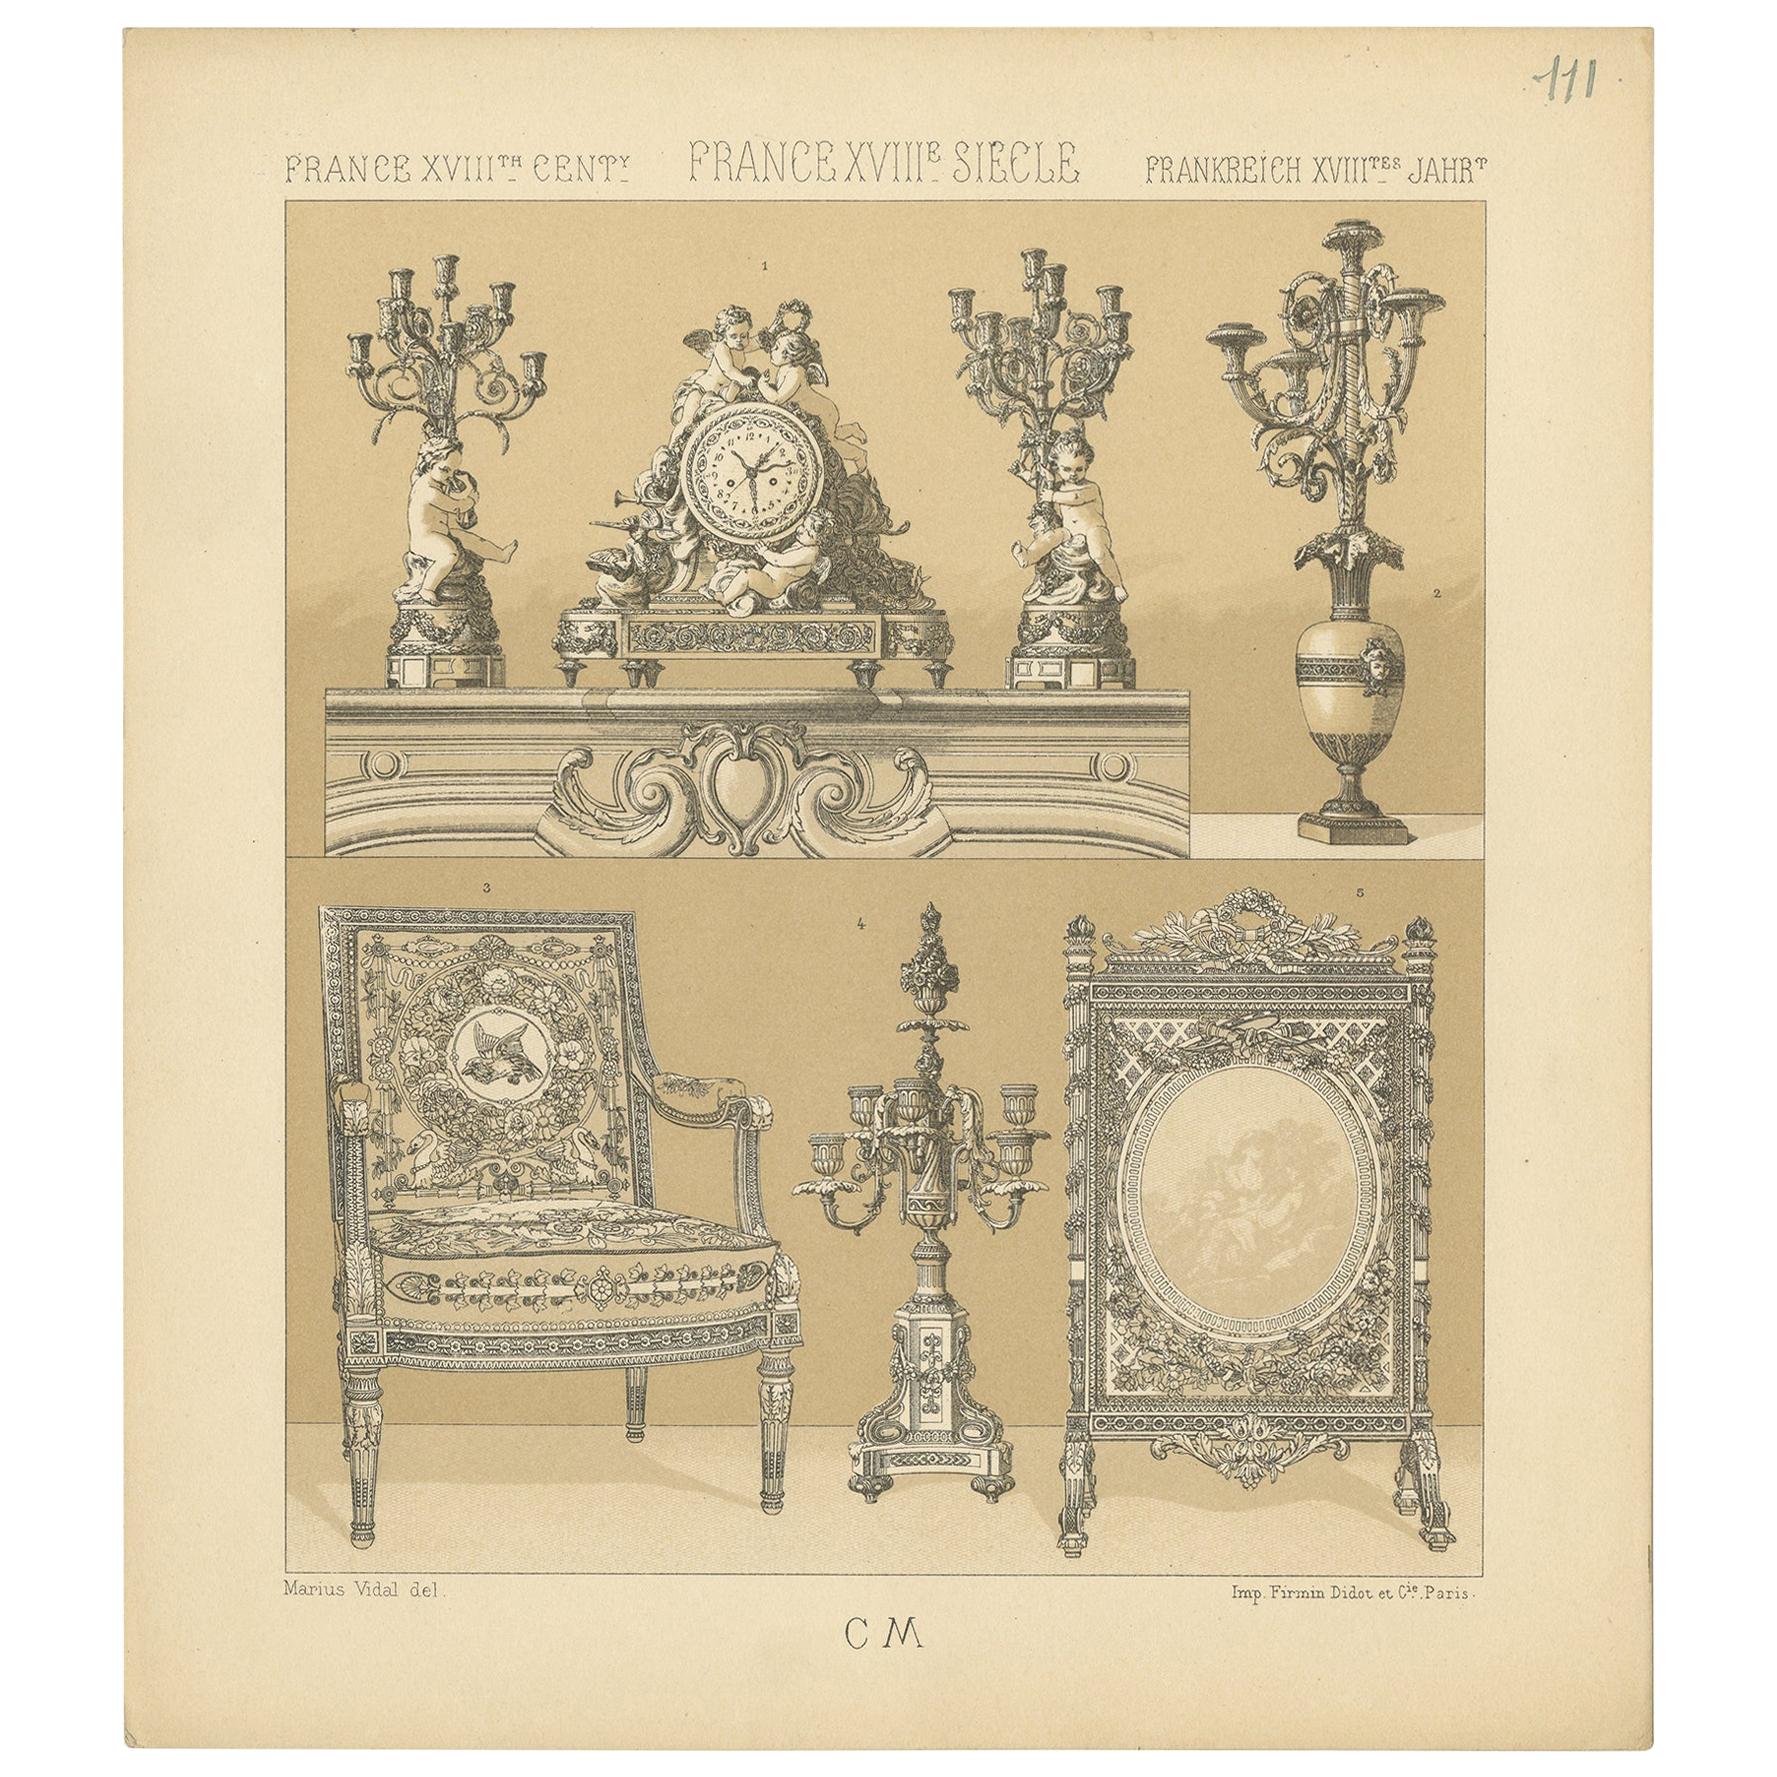 Pl 111 Antique Print of French 18th Century Decorative Objects by Racinet